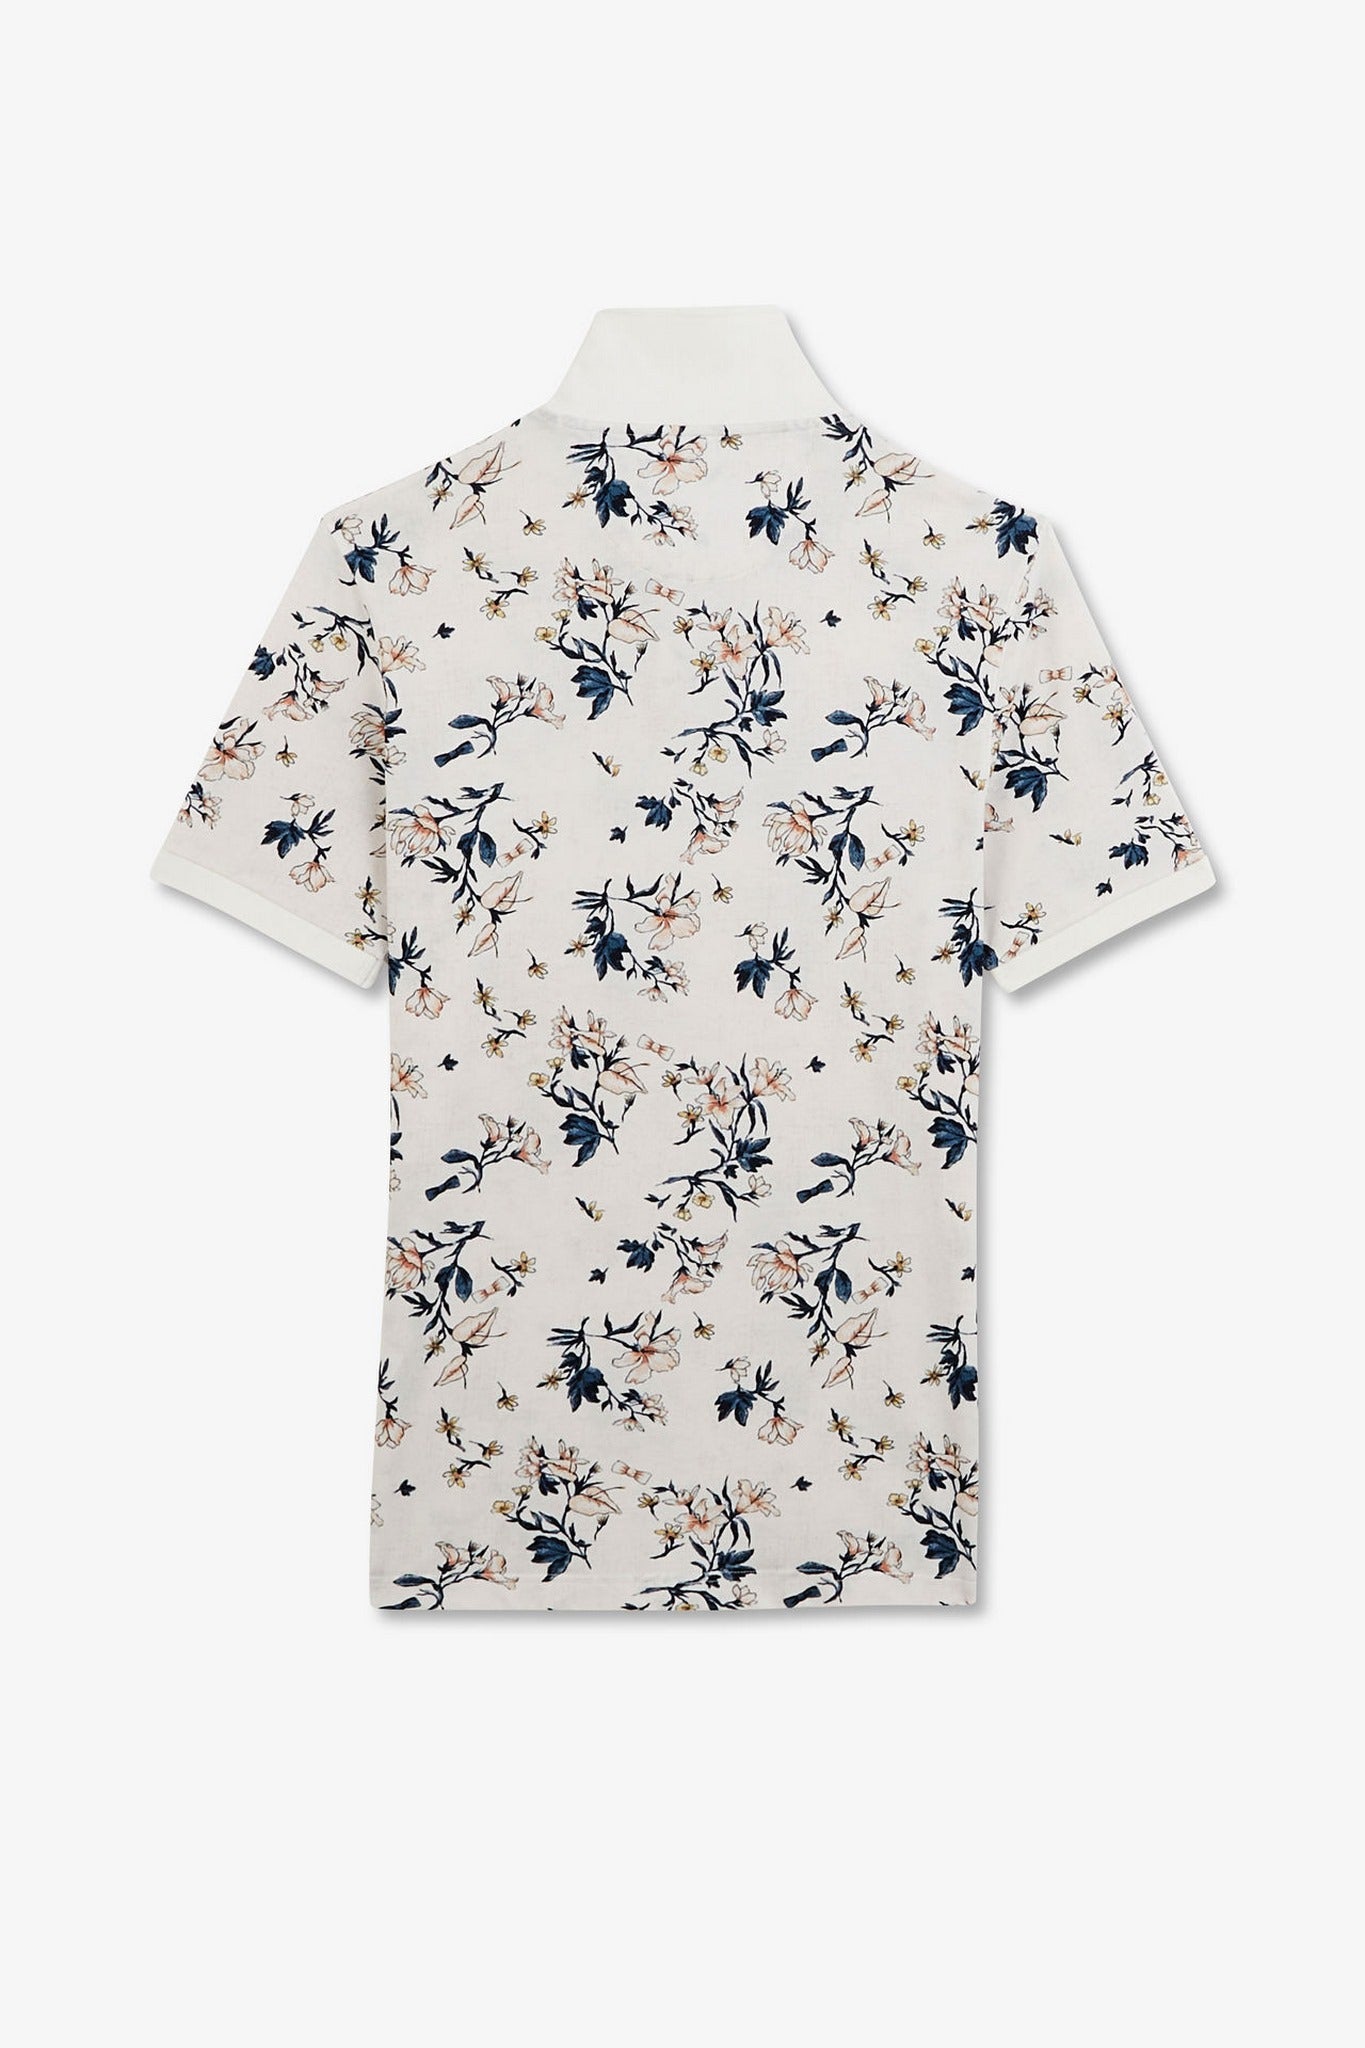 White polo shirt with an exclusive floral print